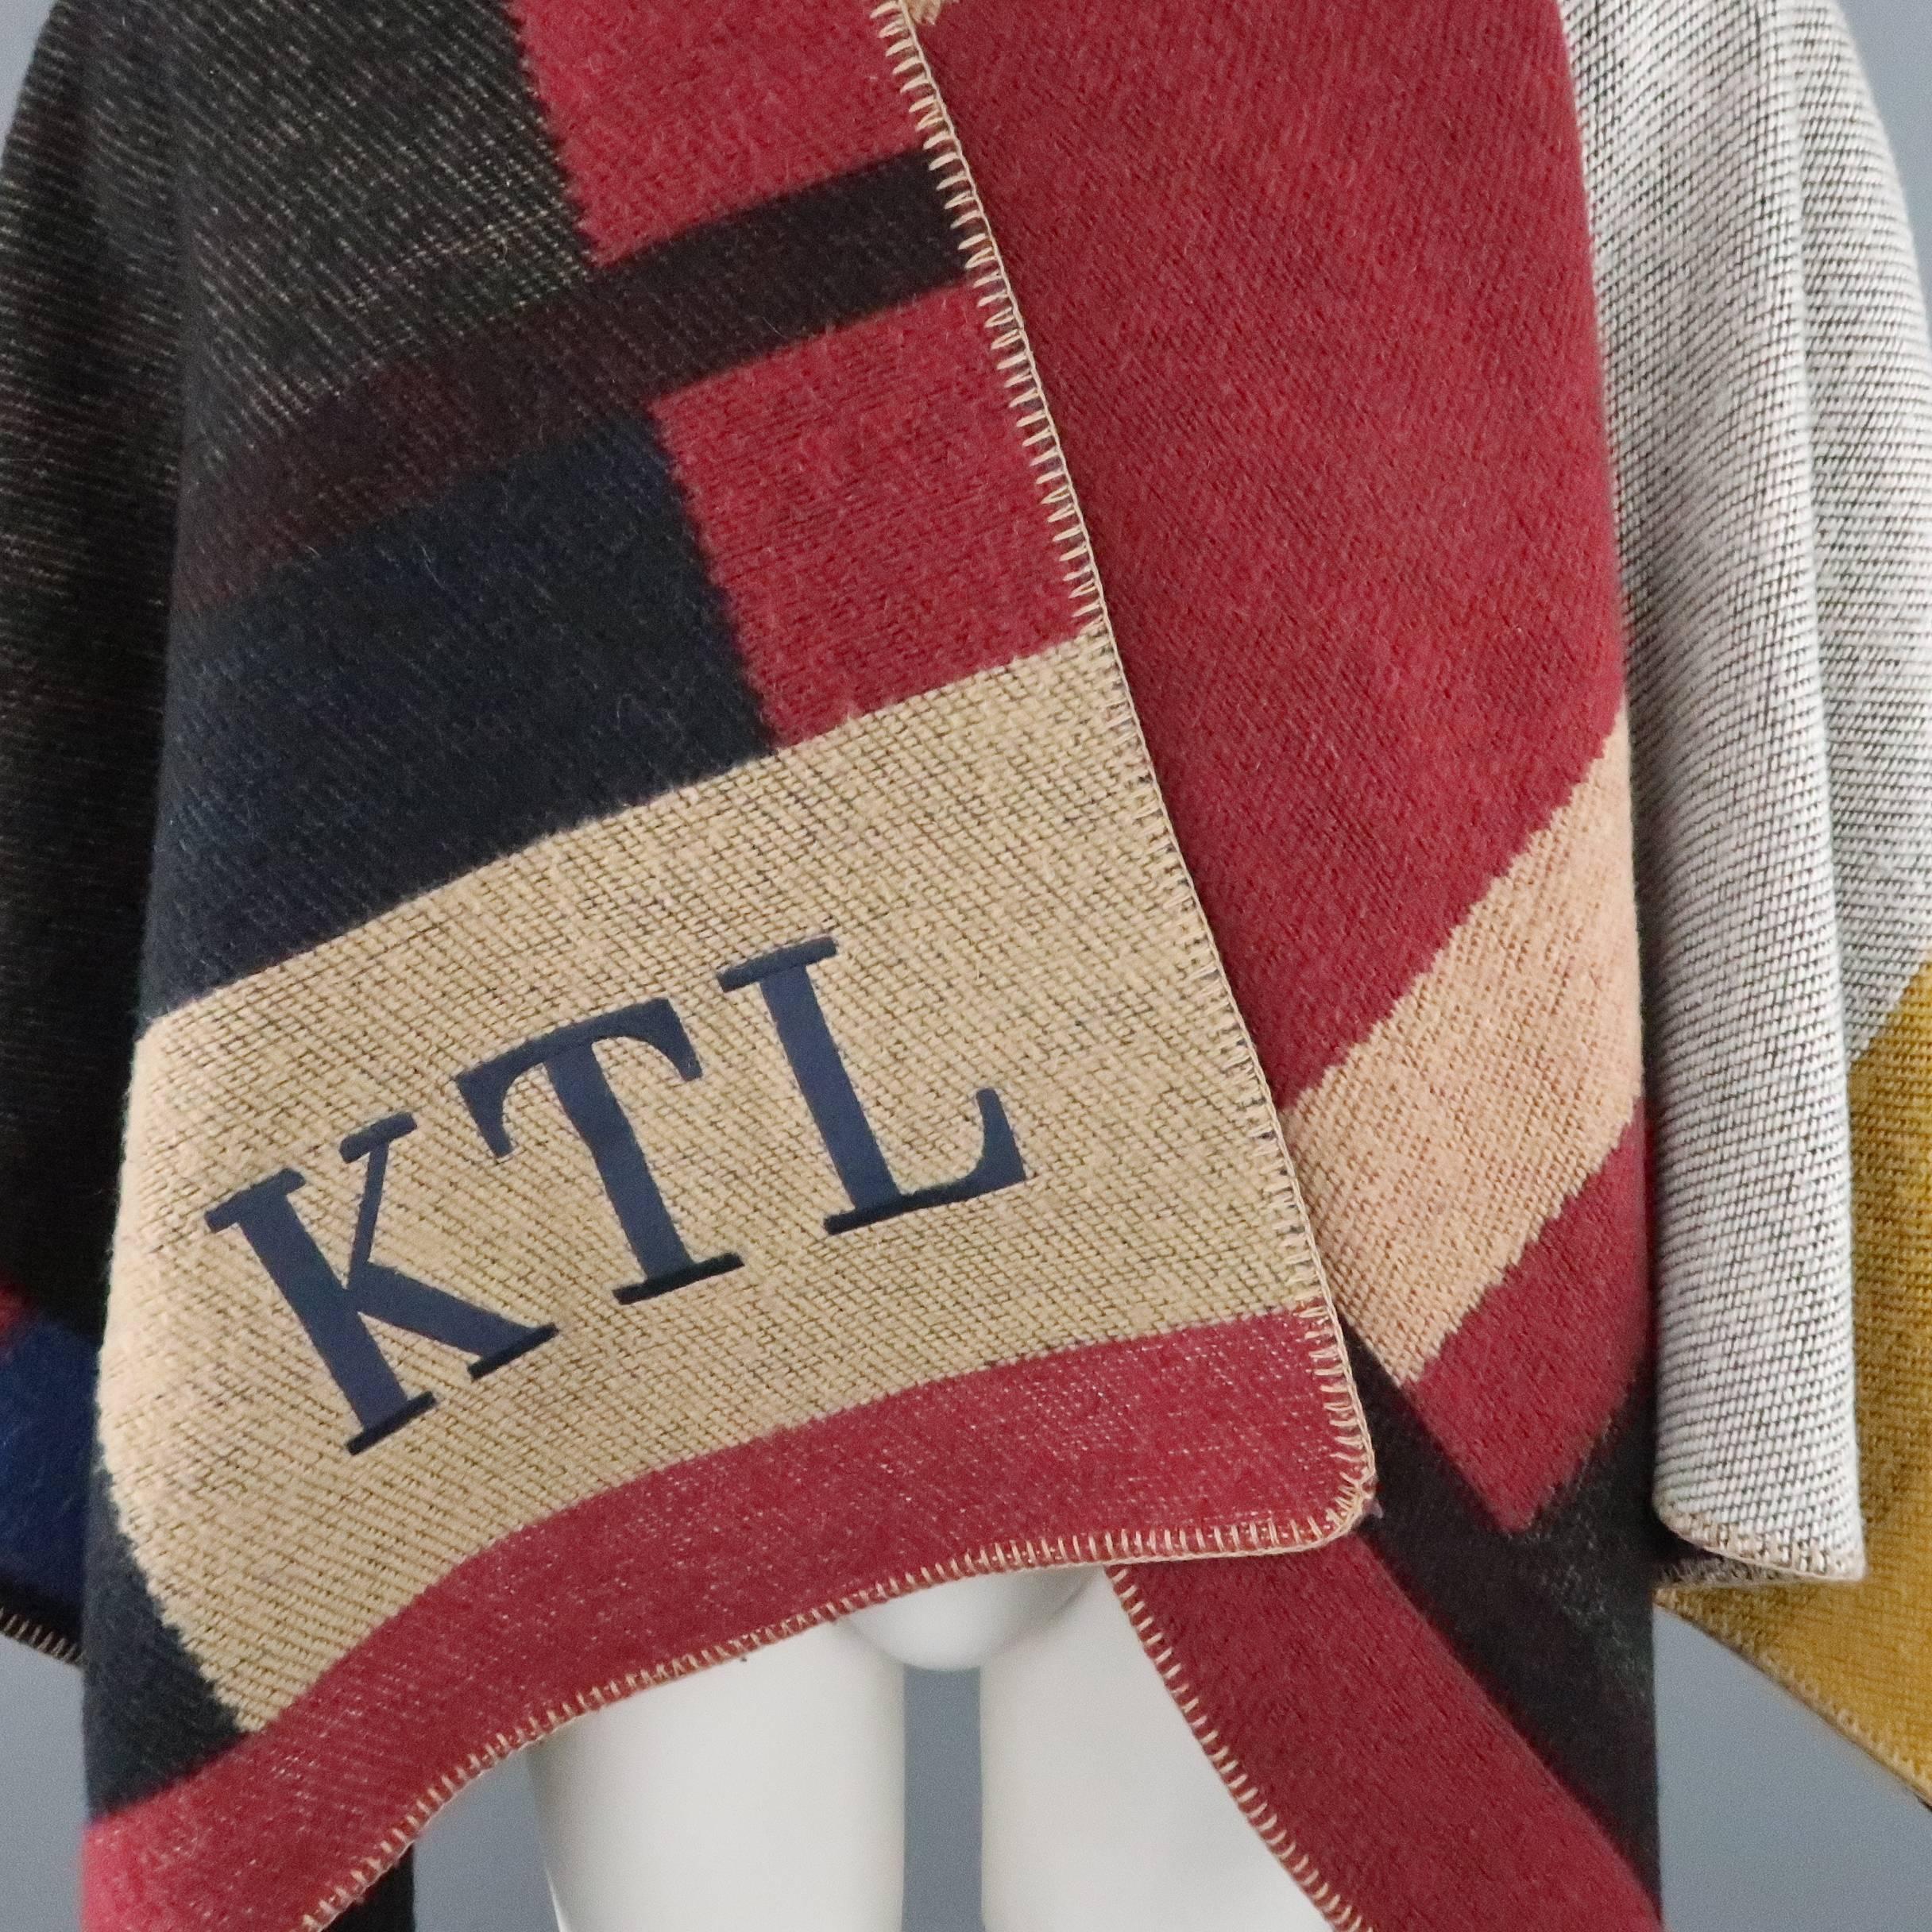 BURBERRY PRORSUM Fall 2014 runway poncho comes in a large scale, multi color interpretation of the houses signature plaid in a wool cashmere blanket knit, open front poncho. Monogrammed with 